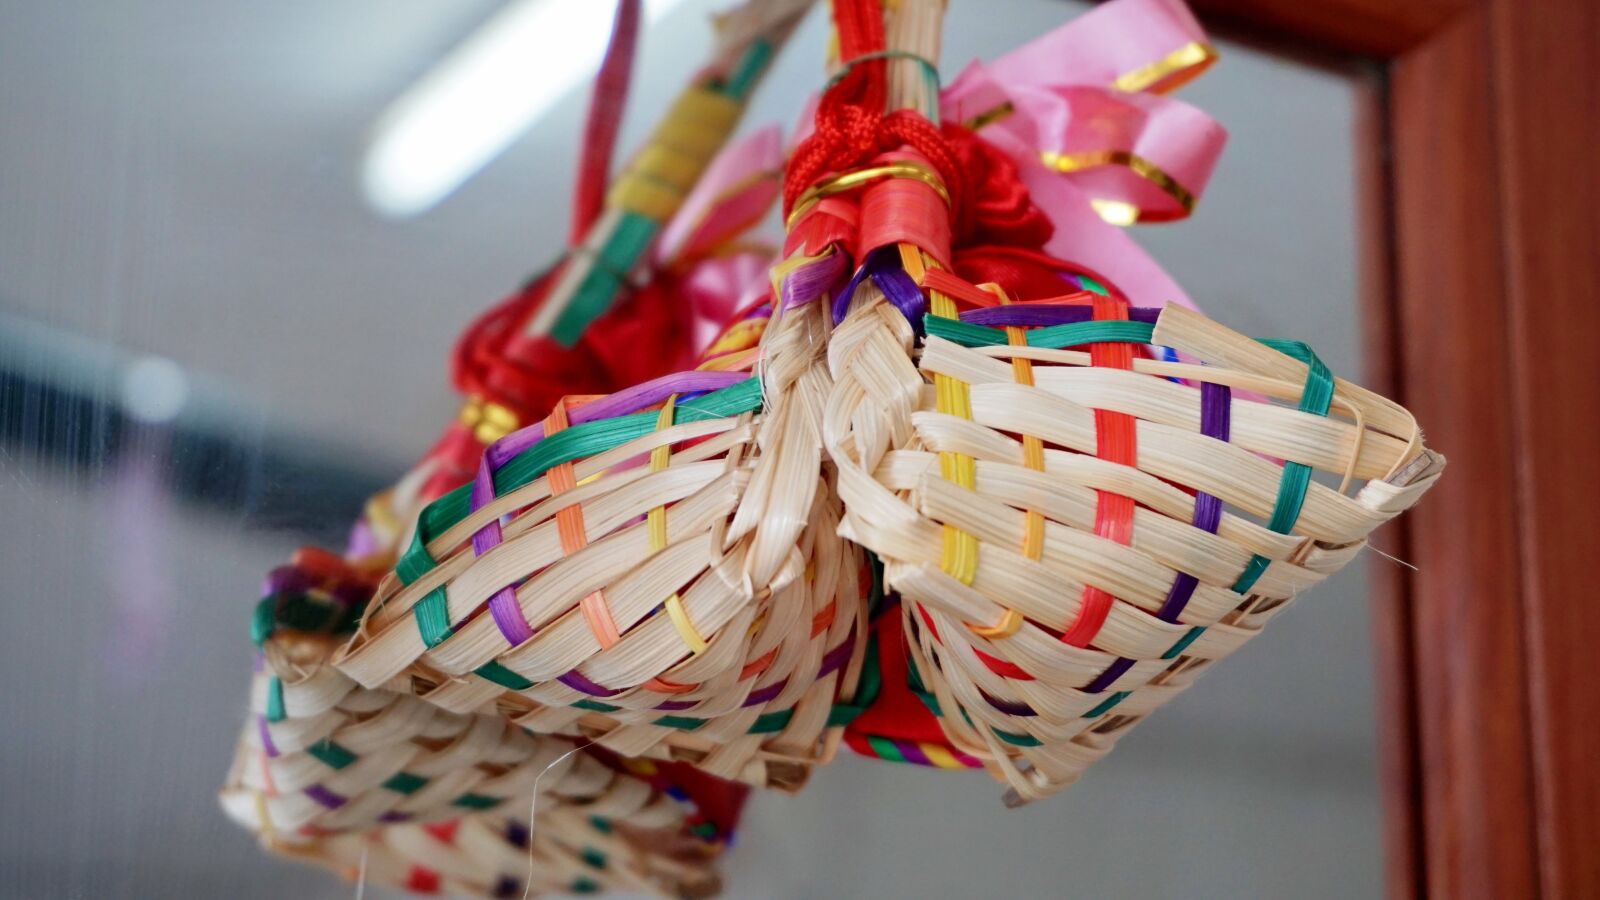 Sony a5100 sample photo. Basket, wallpaper, traditional photography